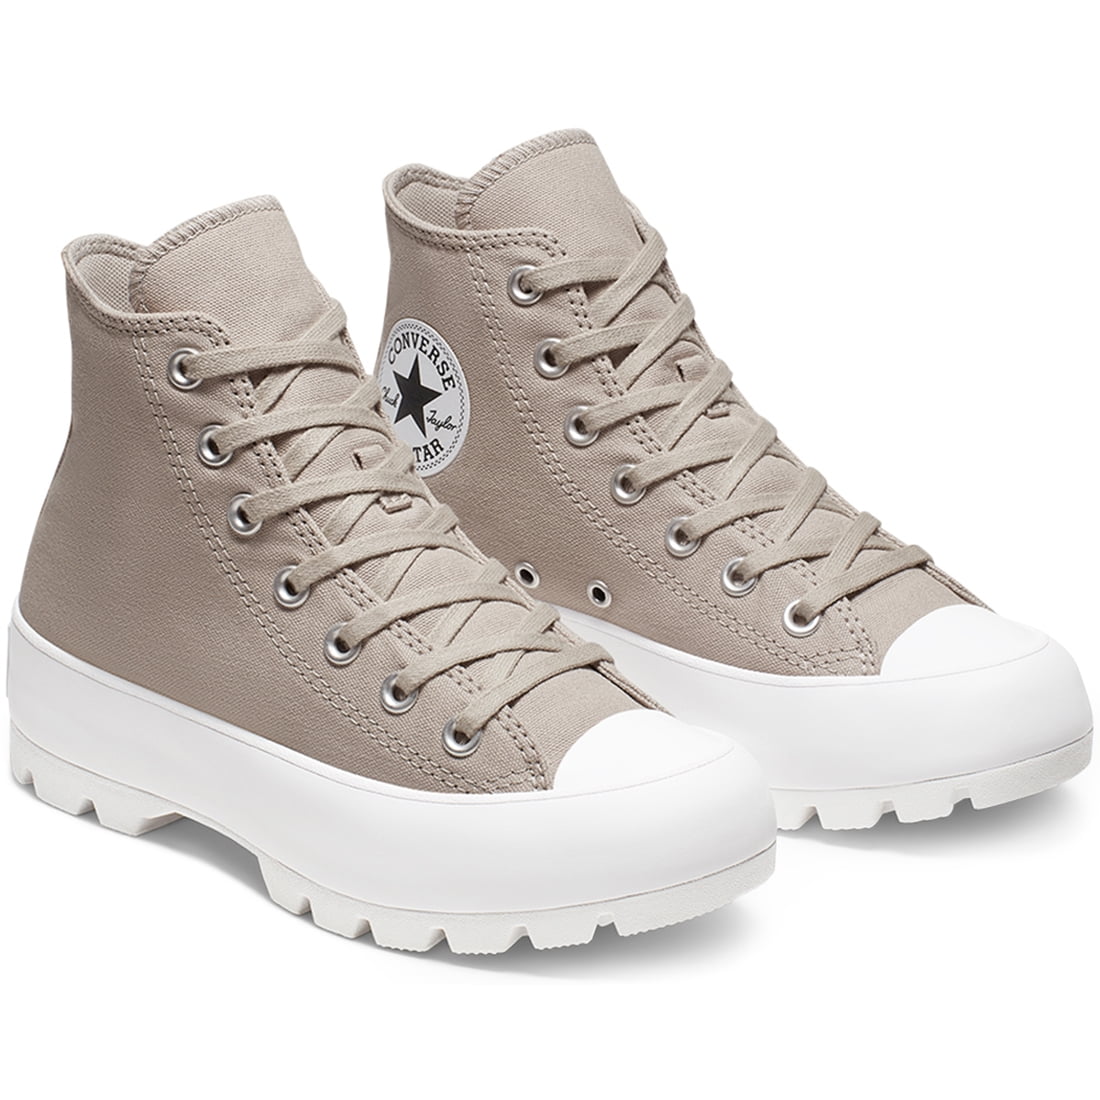 Buy > custom canvas lugged chuck taylor > in stock